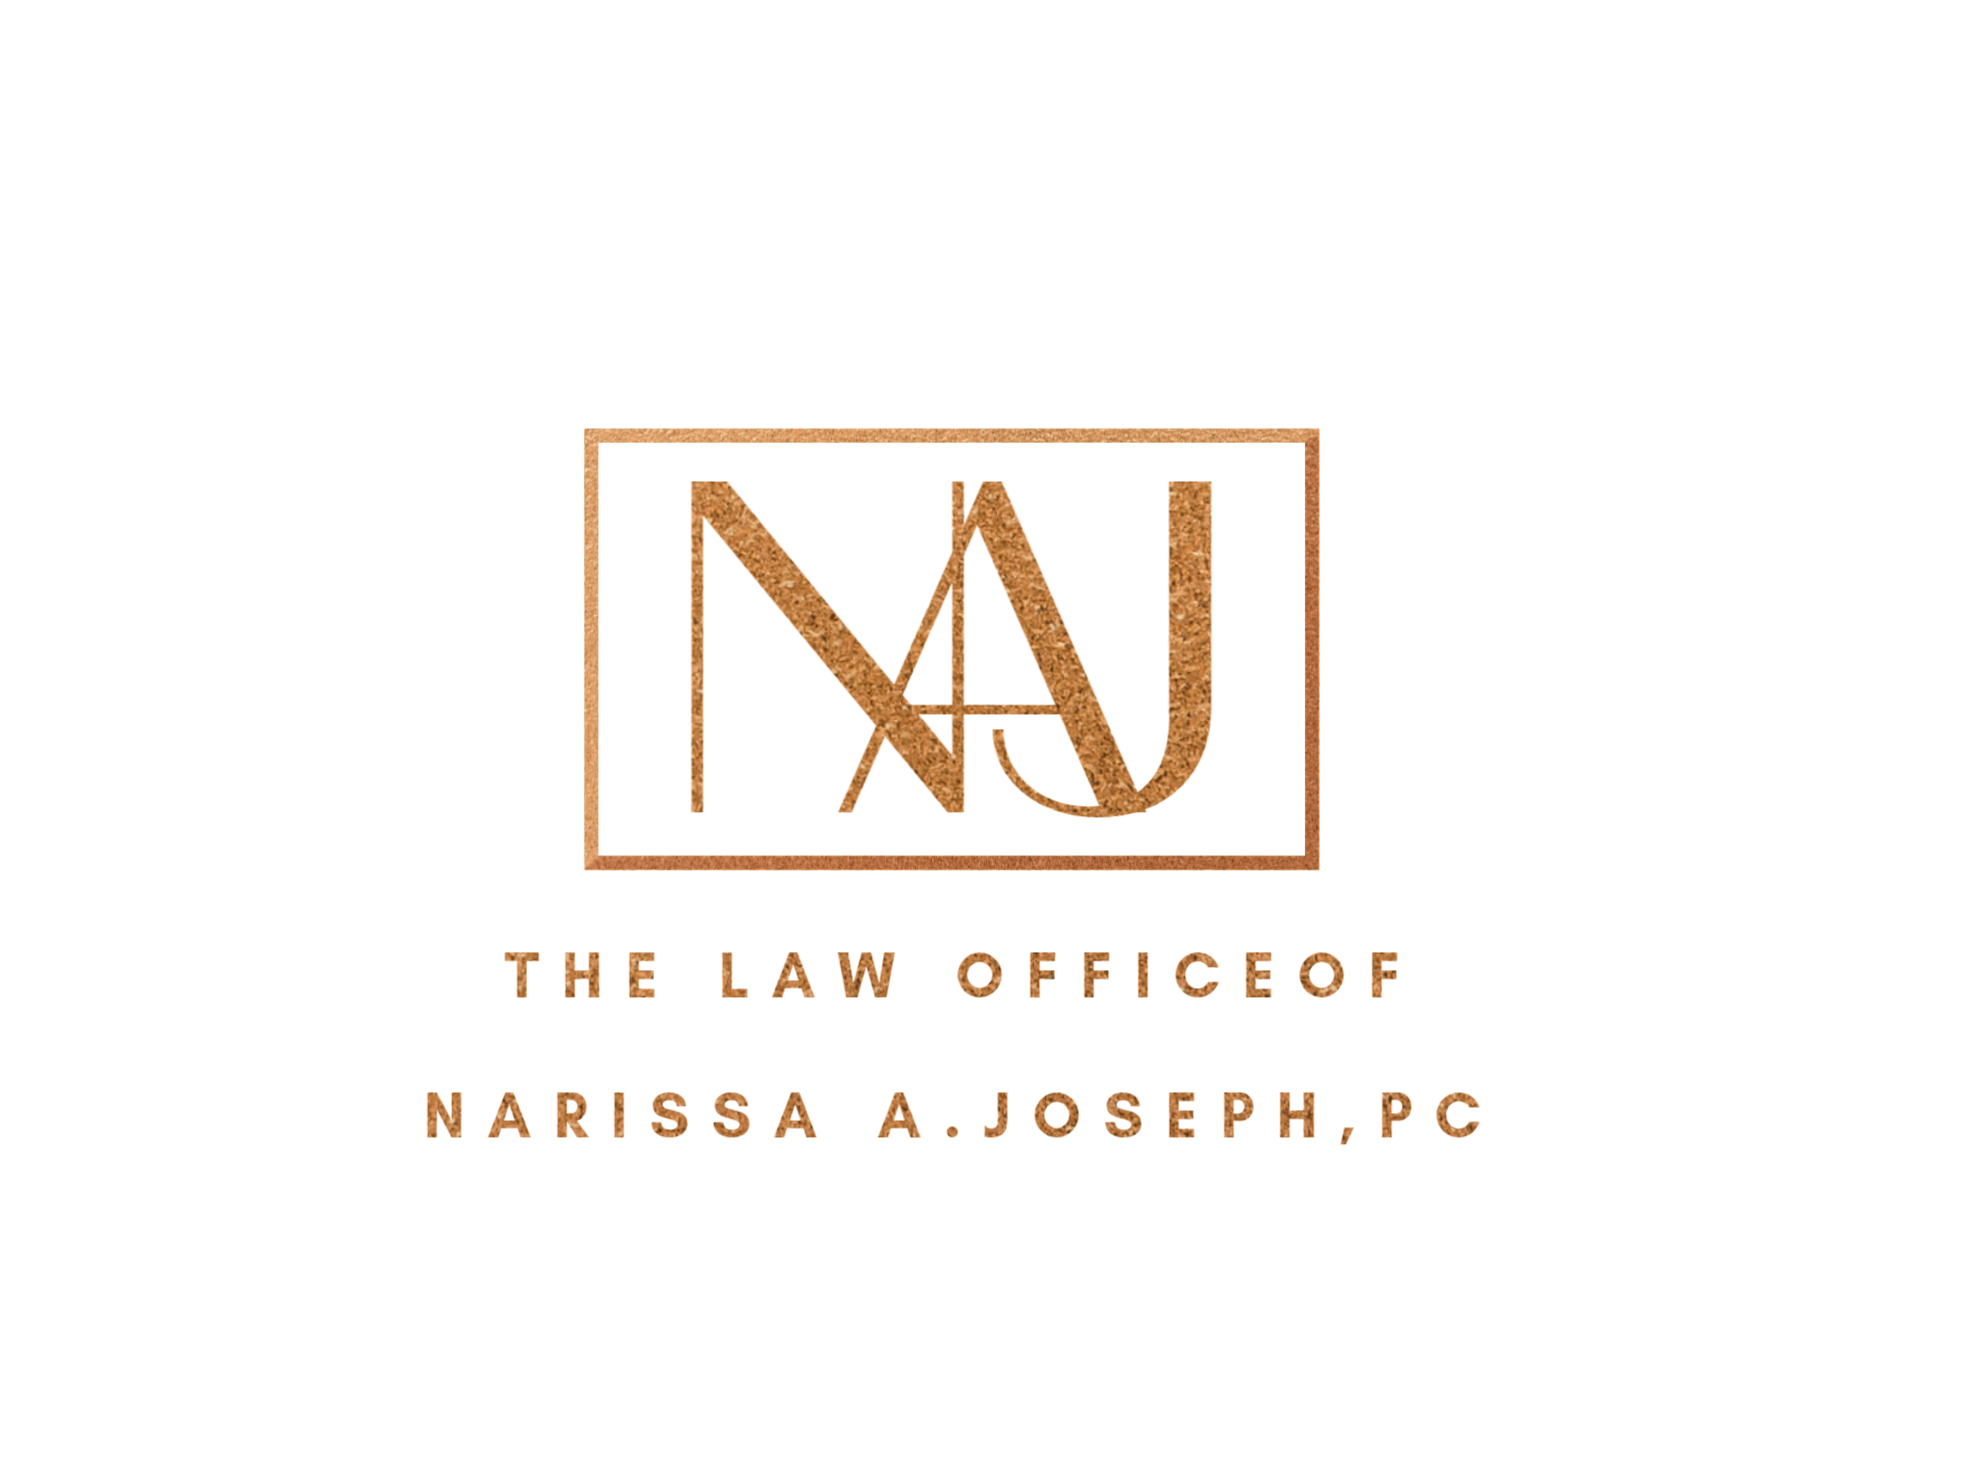 The Law Office of Narissa A. Joeseph